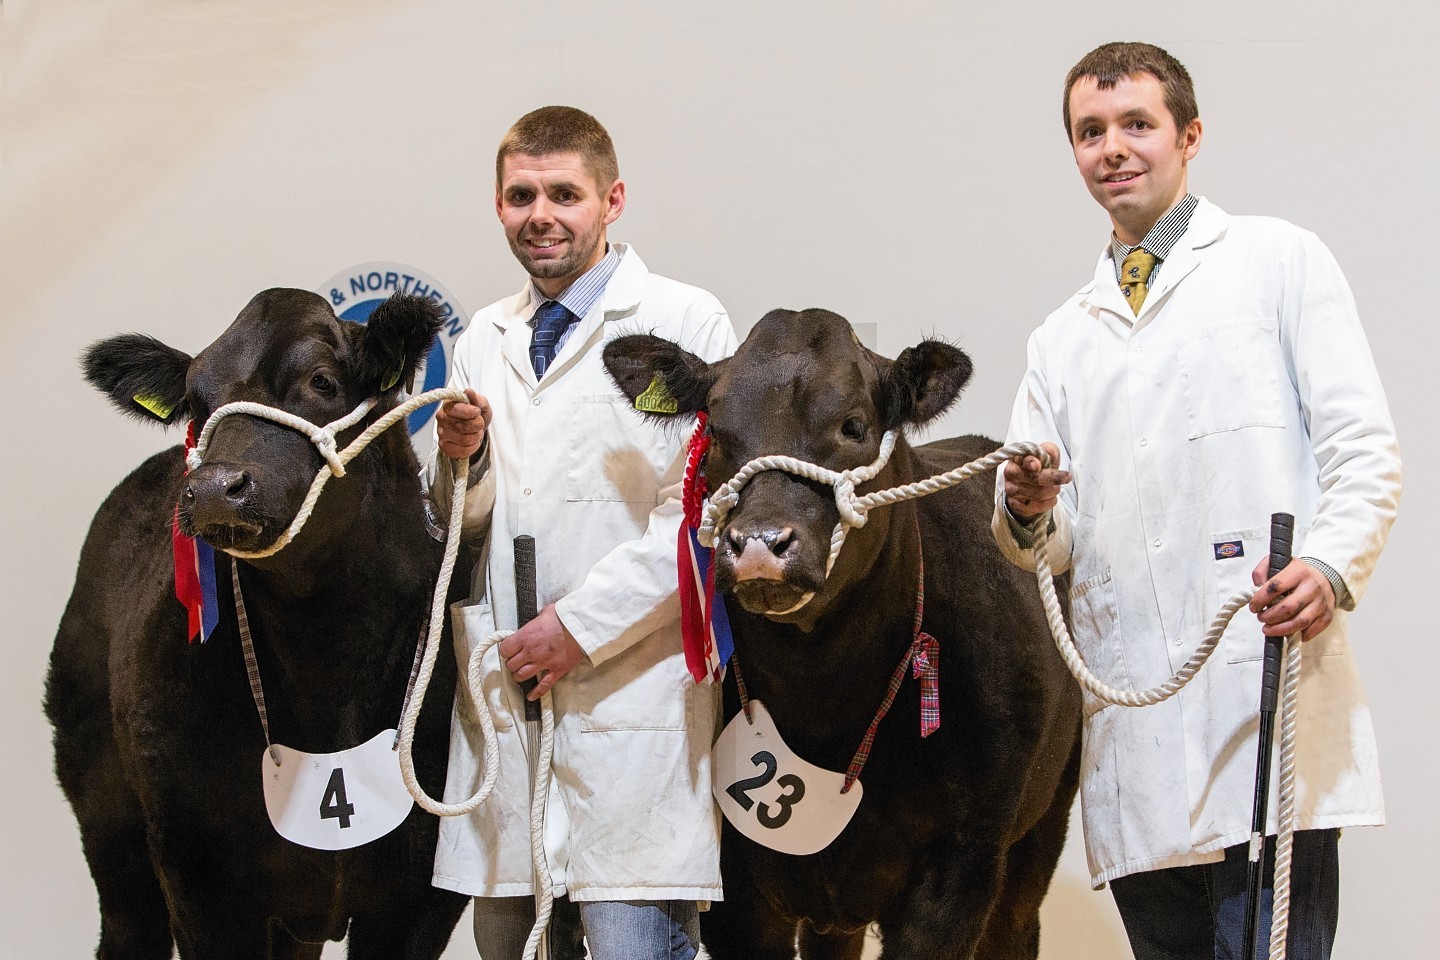 Brothers Grant (left) and Ally Fraser of Easter Clune, Nairn with the champion bullock (left) and heifer, which went on to stand overall champion.